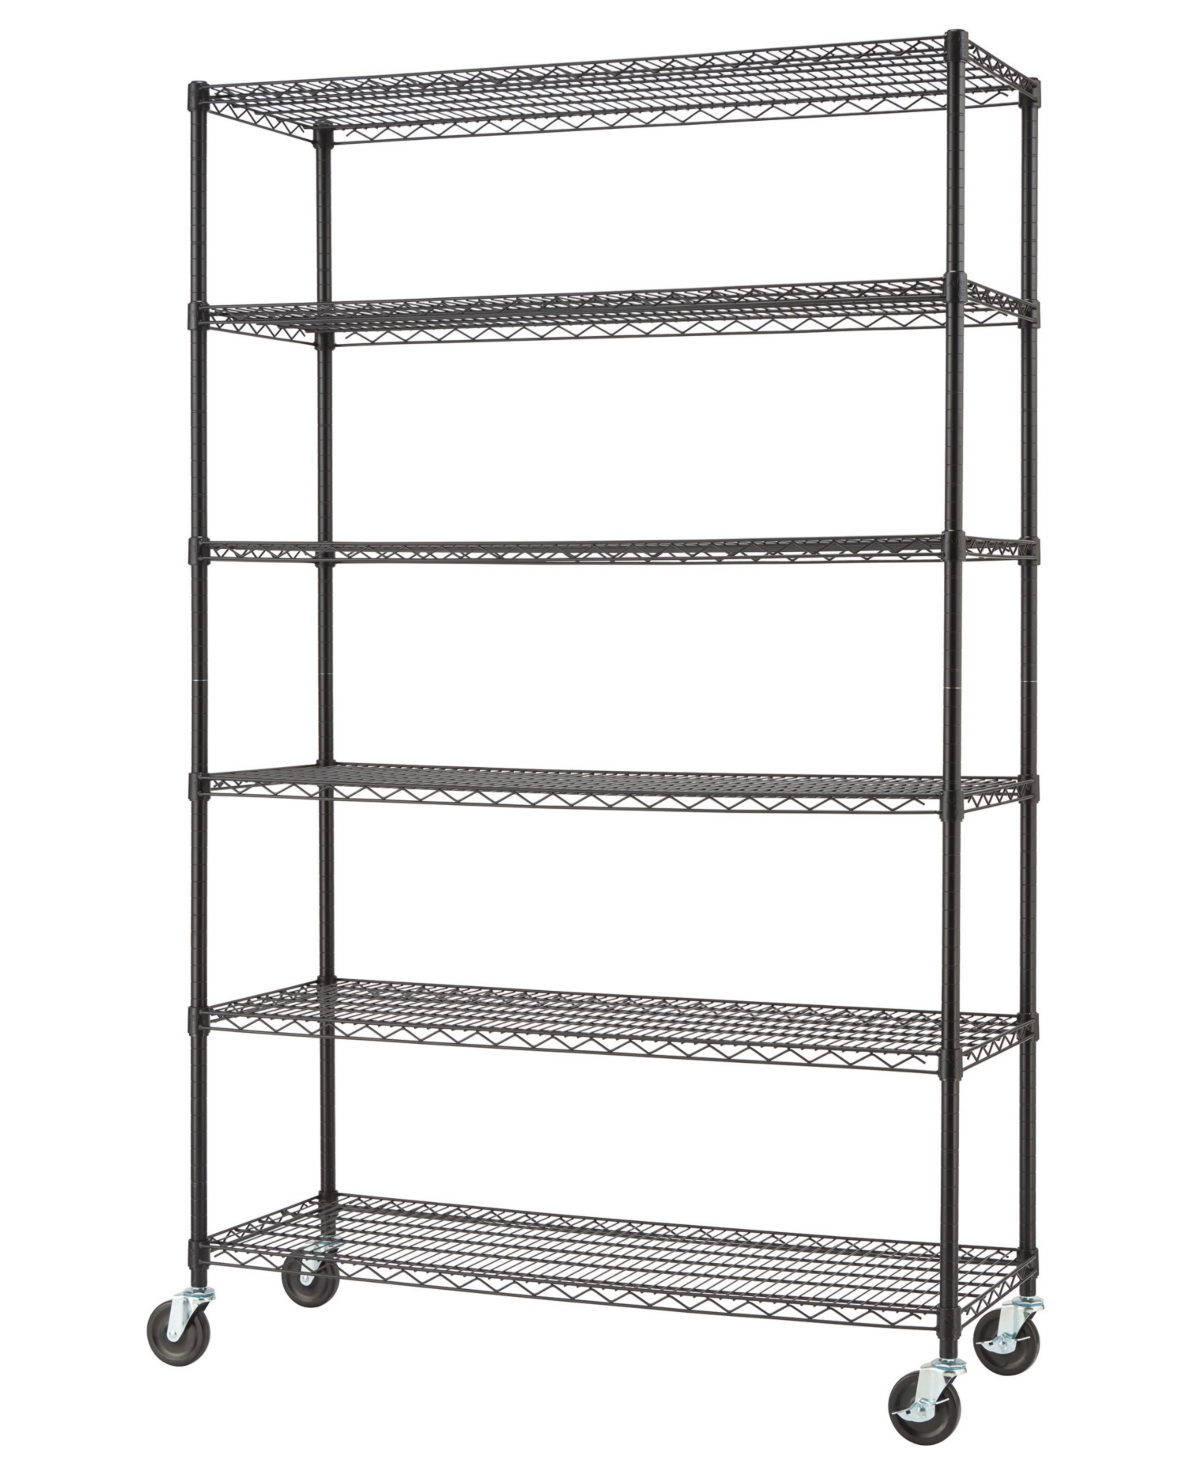 Basics 6-Tier Wire Shelving Rack with Nsf Includes Wheels - Black